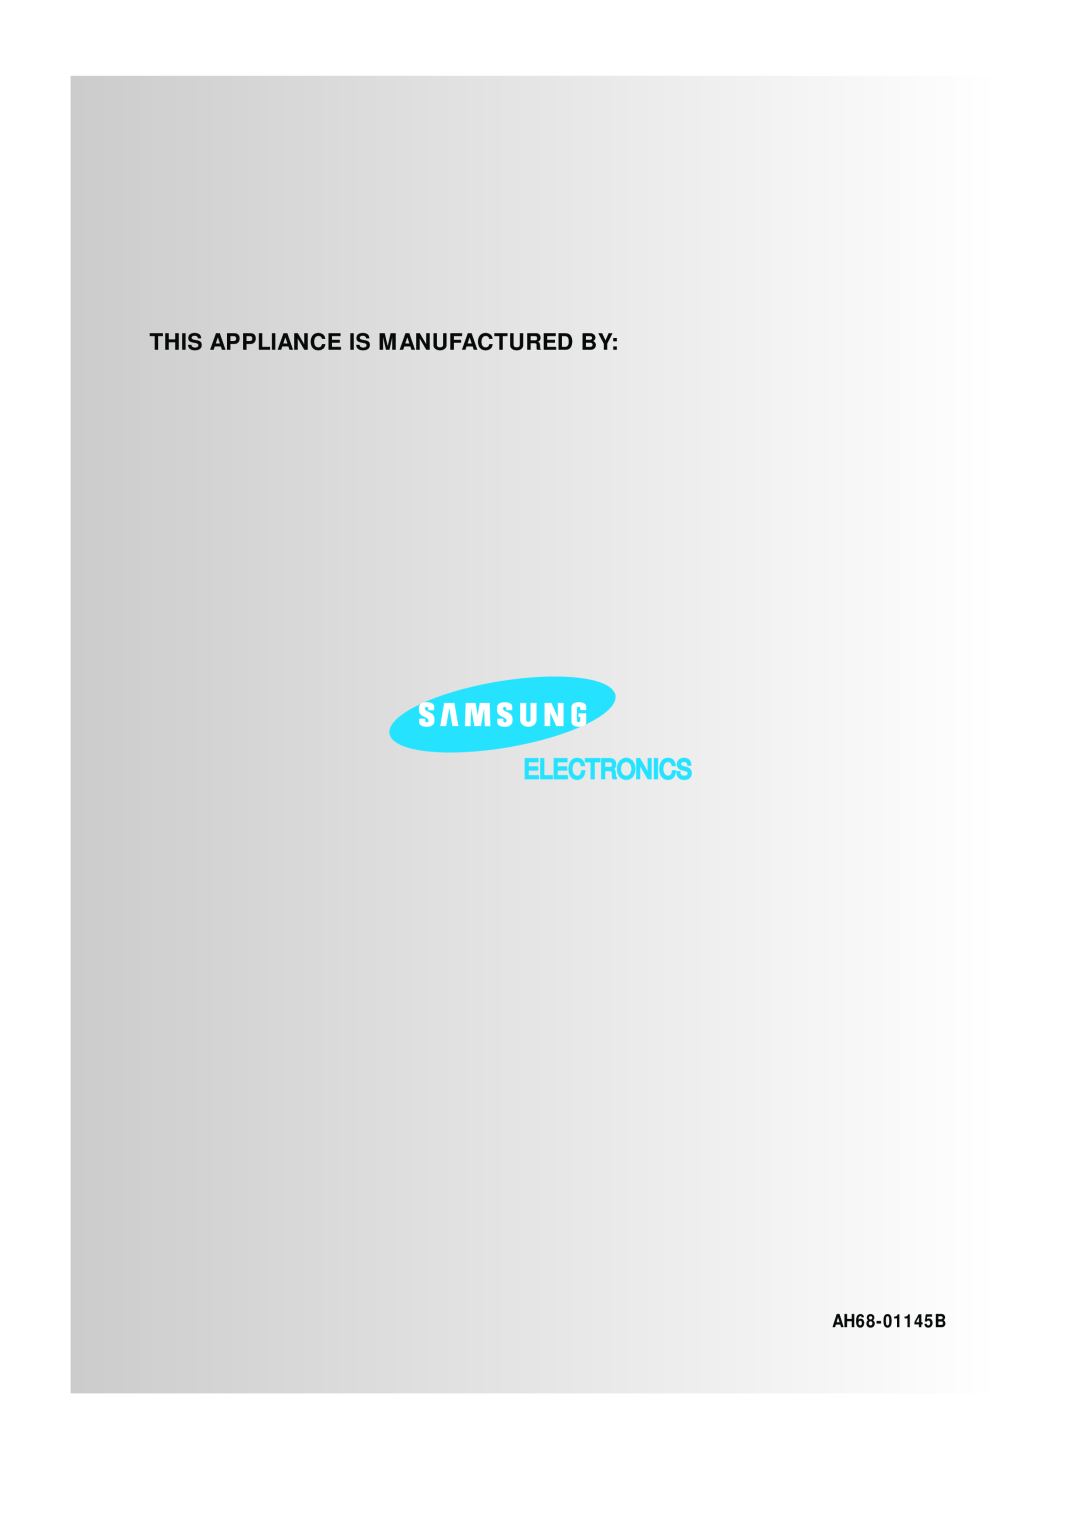 Samsung AH68-01145B, MAX-VB550 instruction manual Electronics, This Appliance Is Manufactured By 